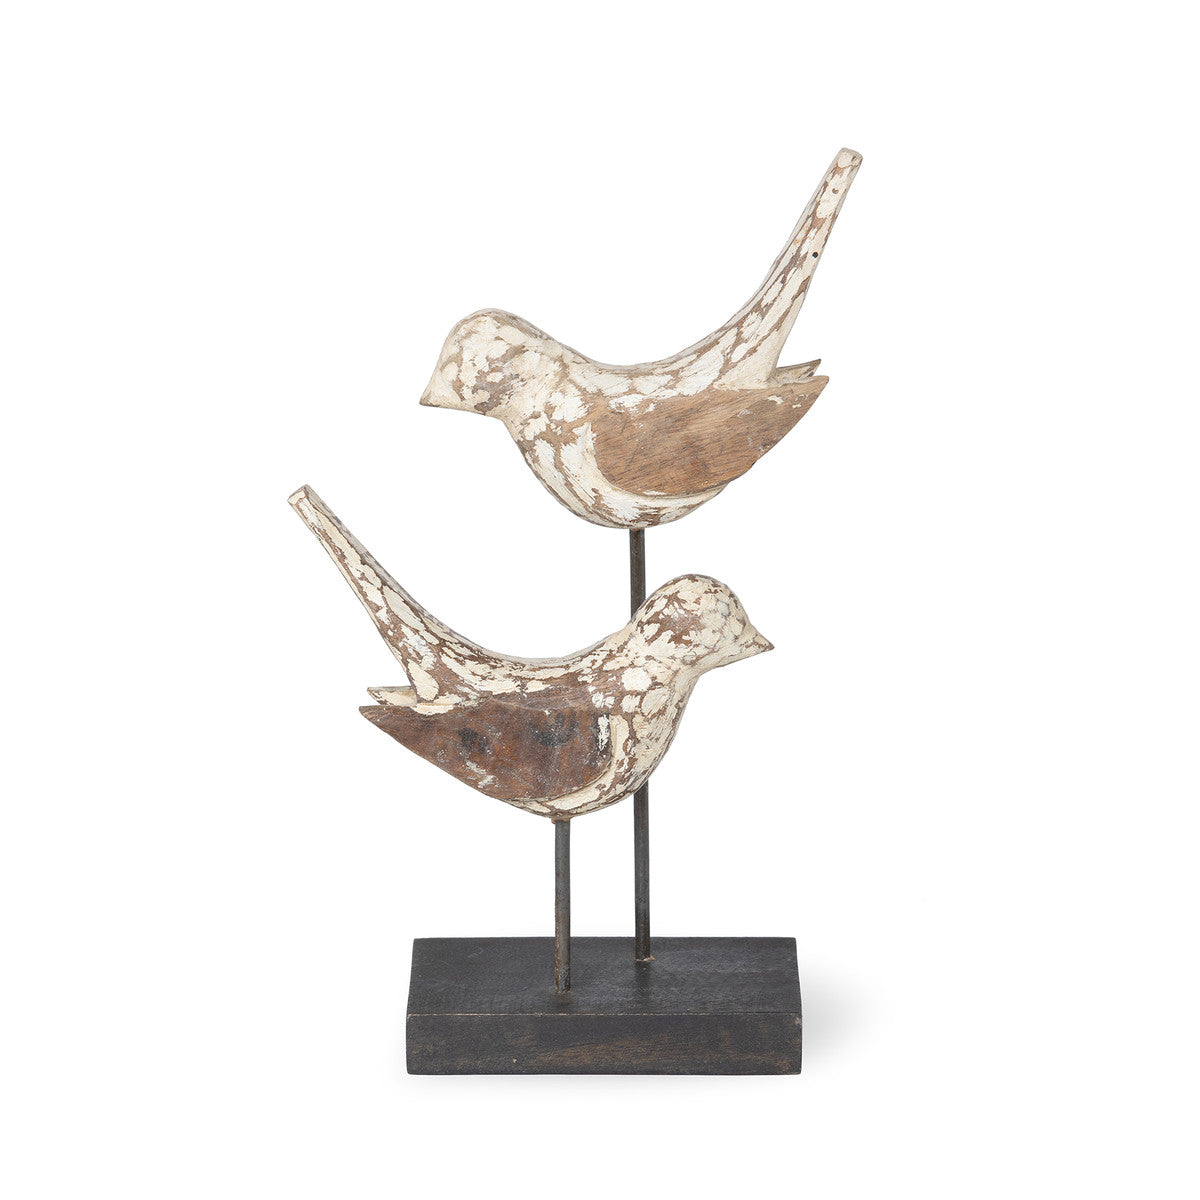 Carved Wood Songbirds On Stand